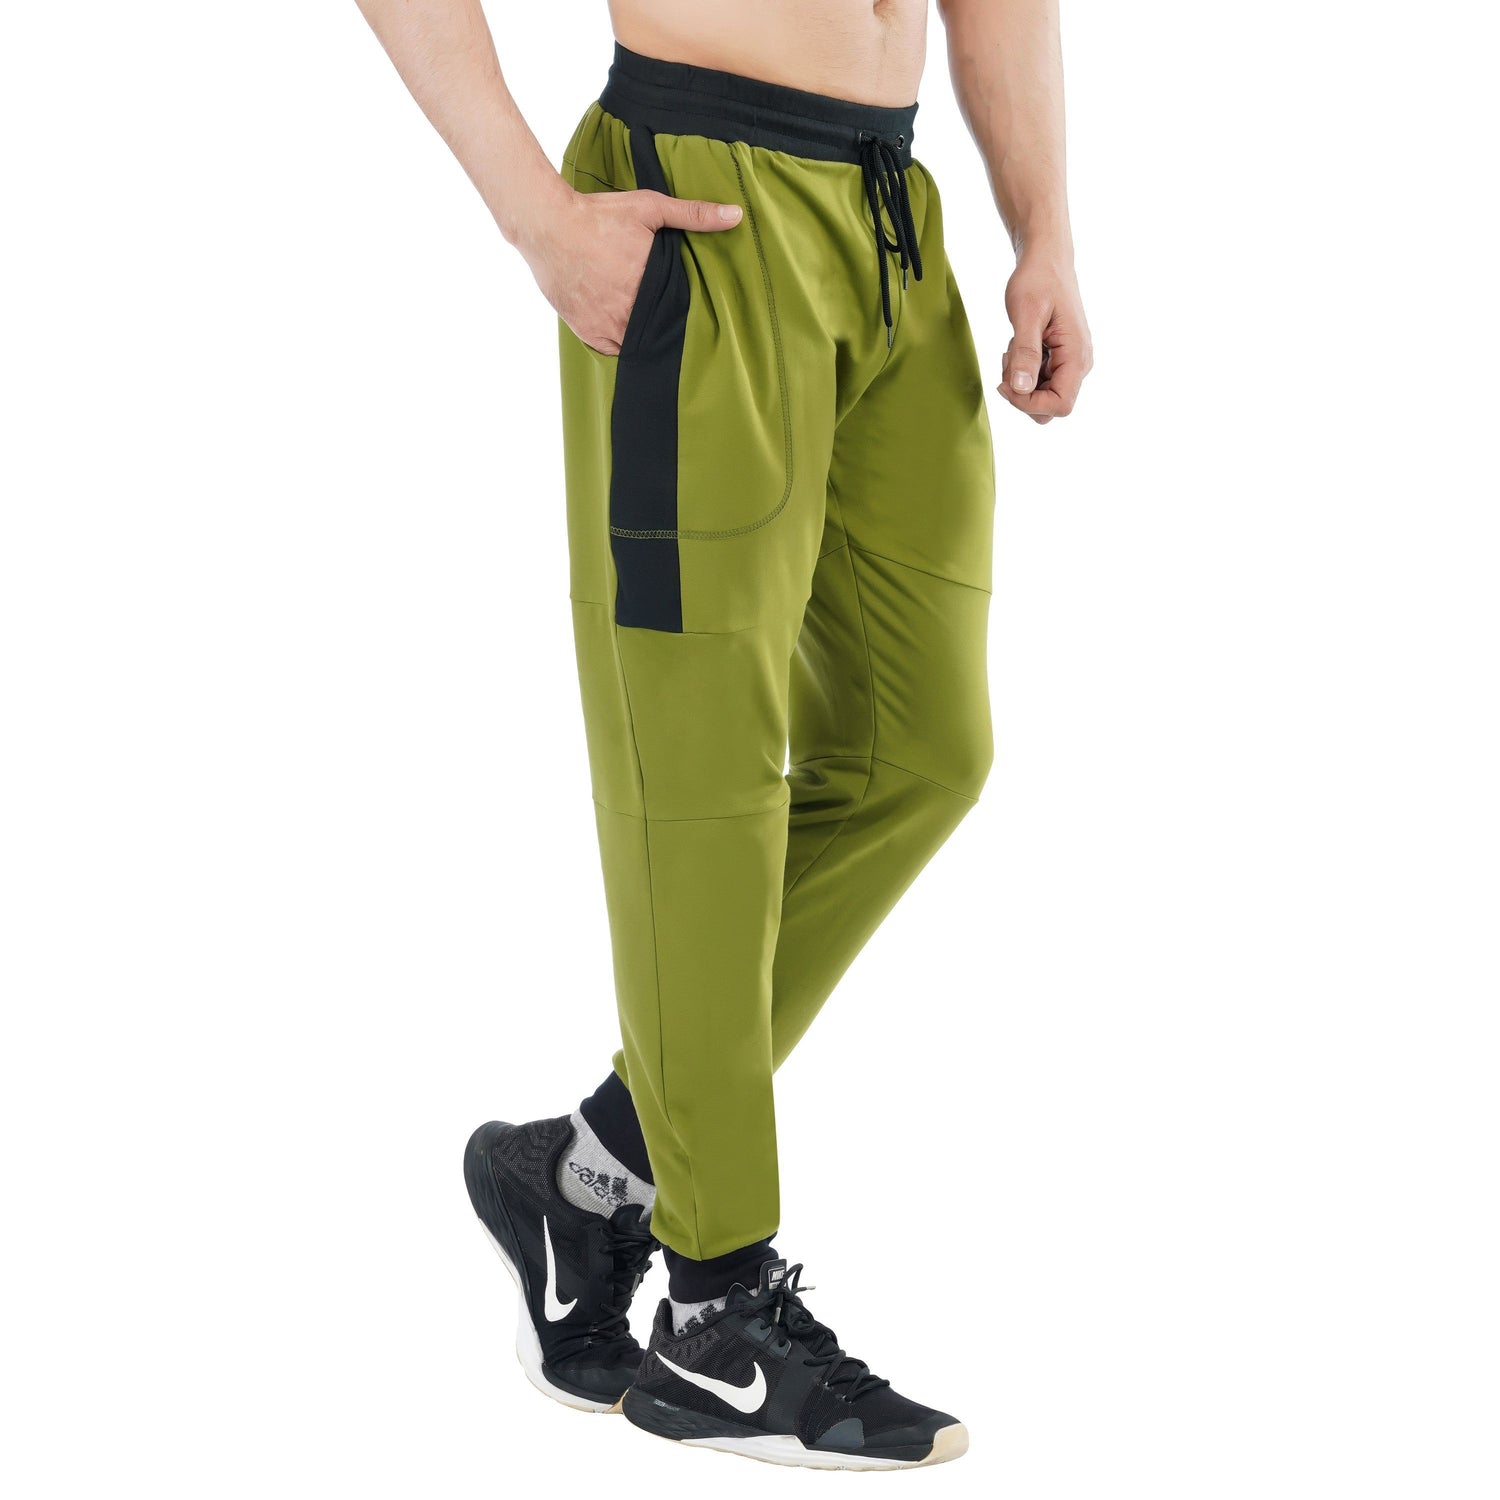 SLAY. Men's Olive Green Joggers with Black Side Strip-clothing-to-slay.myshopify.com-Joggers